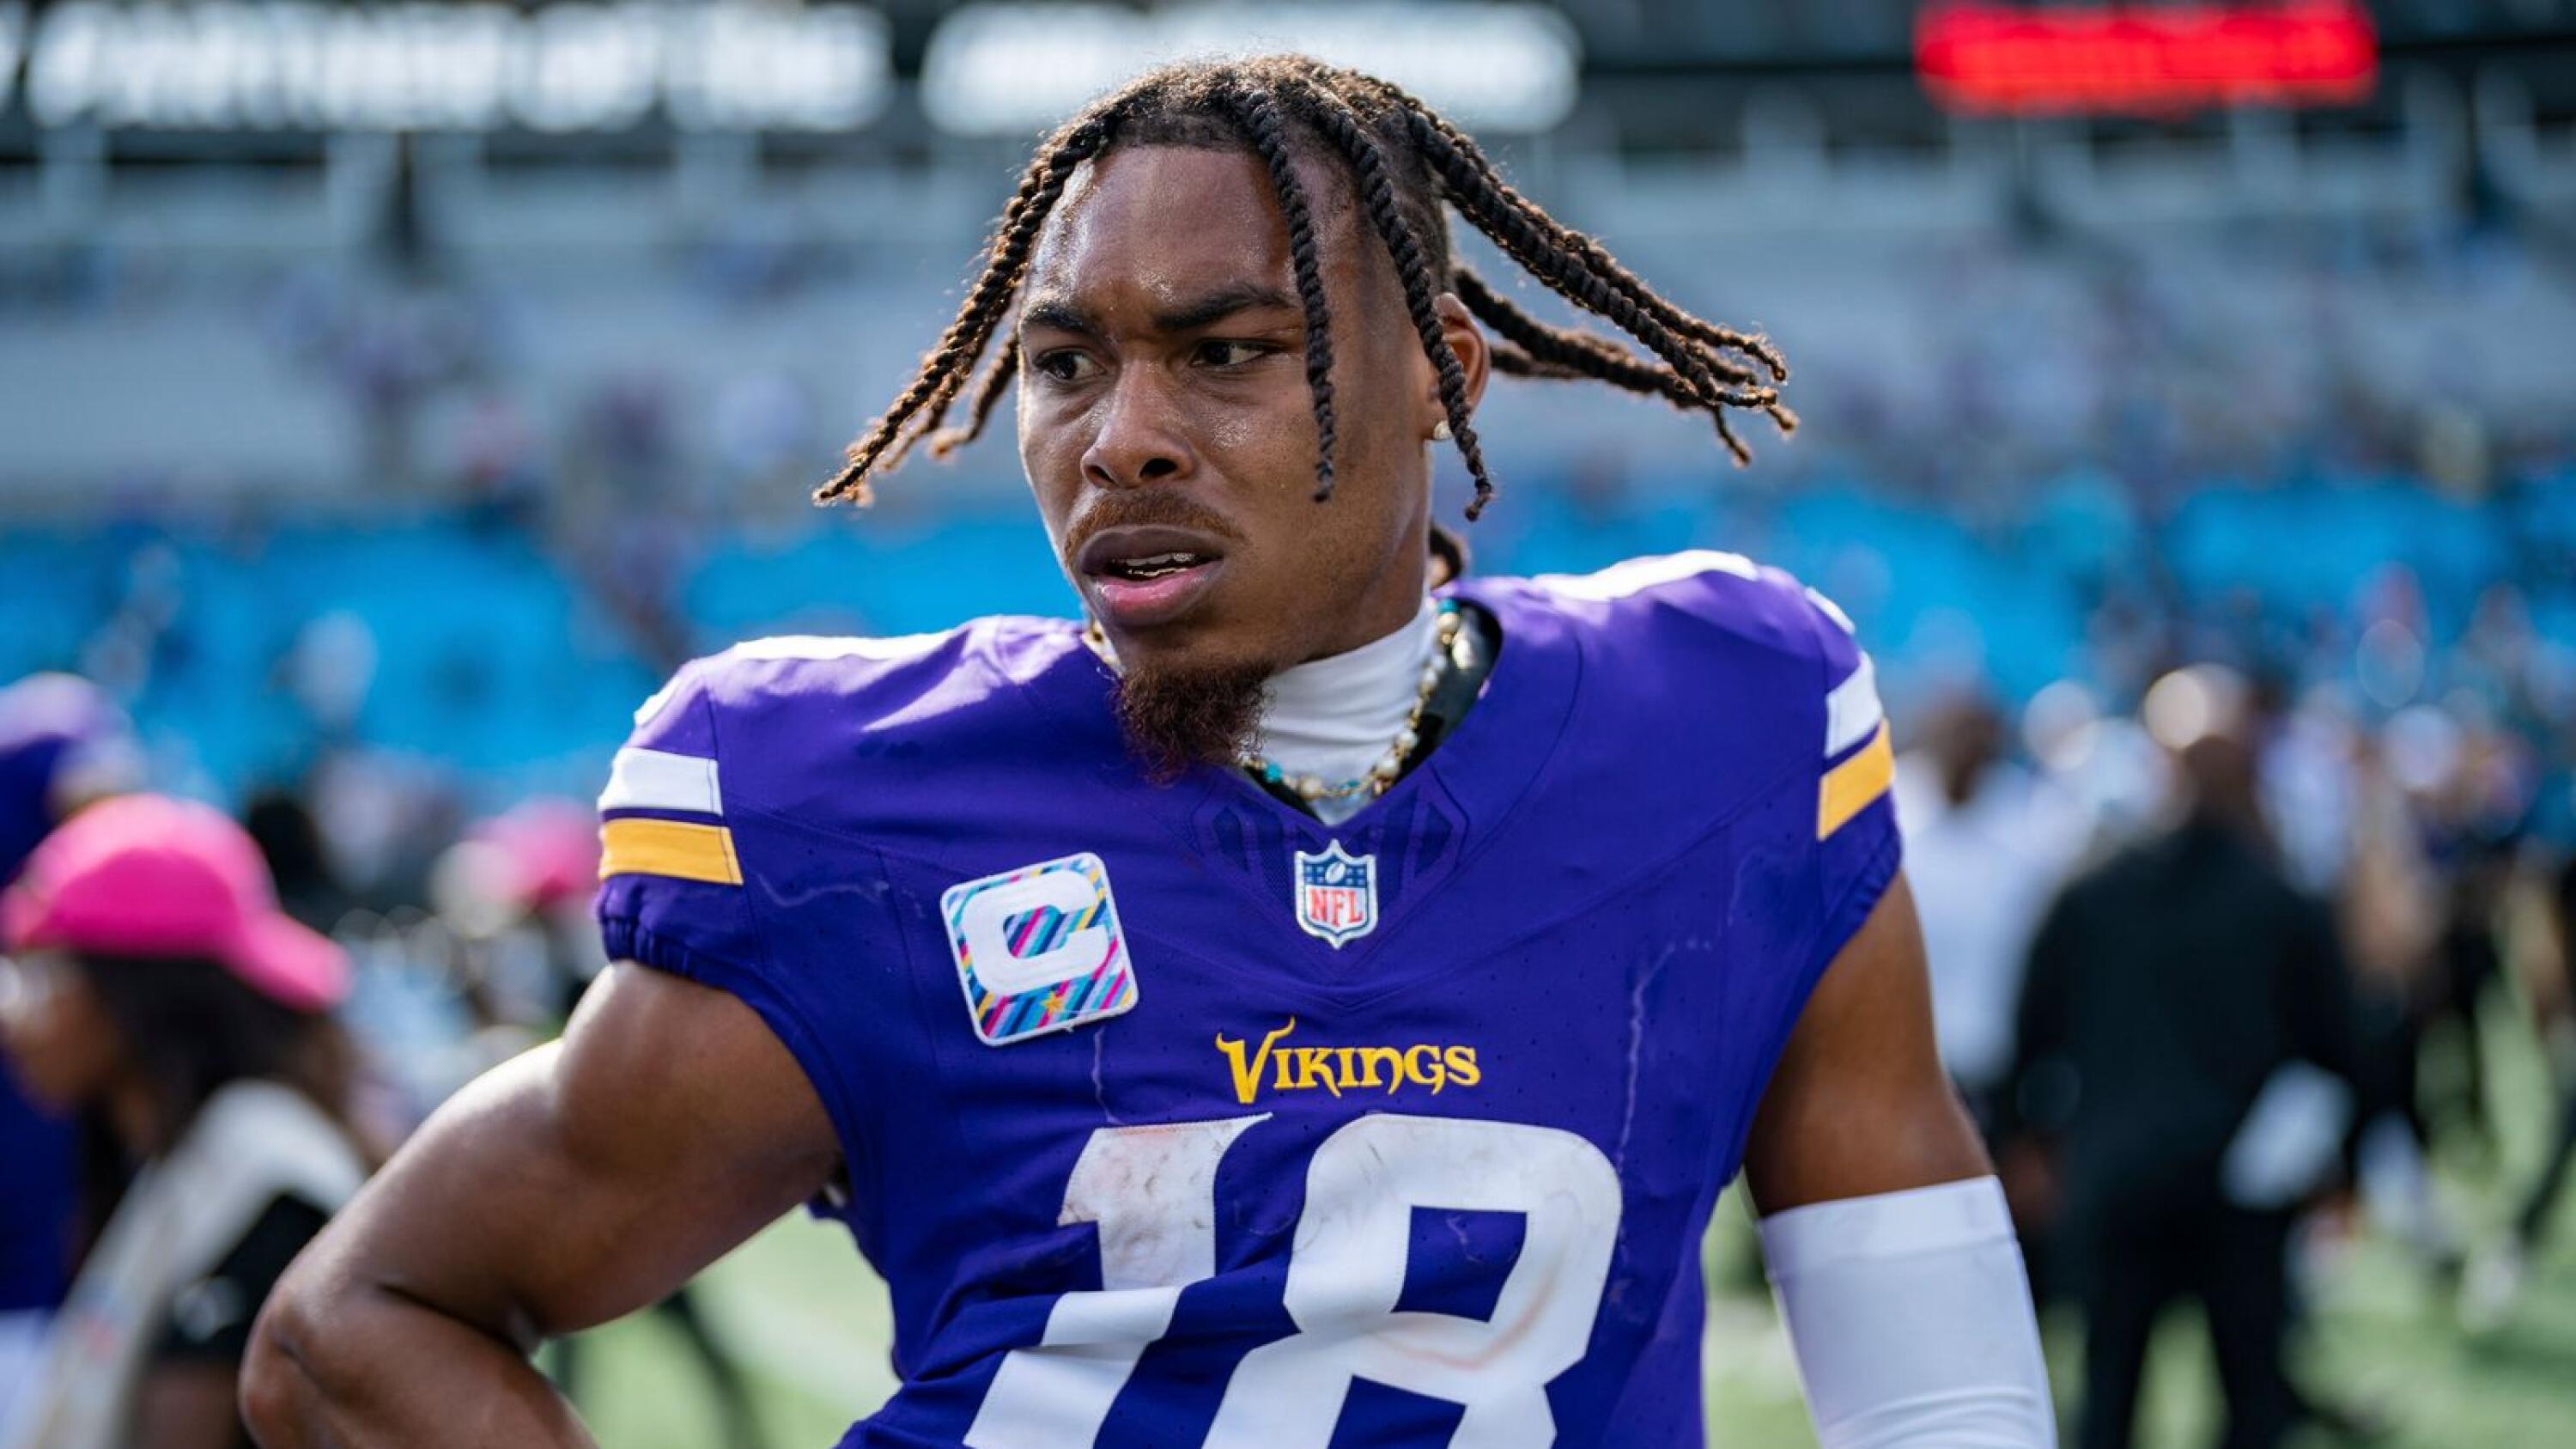 Vikings place star WR Justin Jefferson on IR, out at least 4 weeks